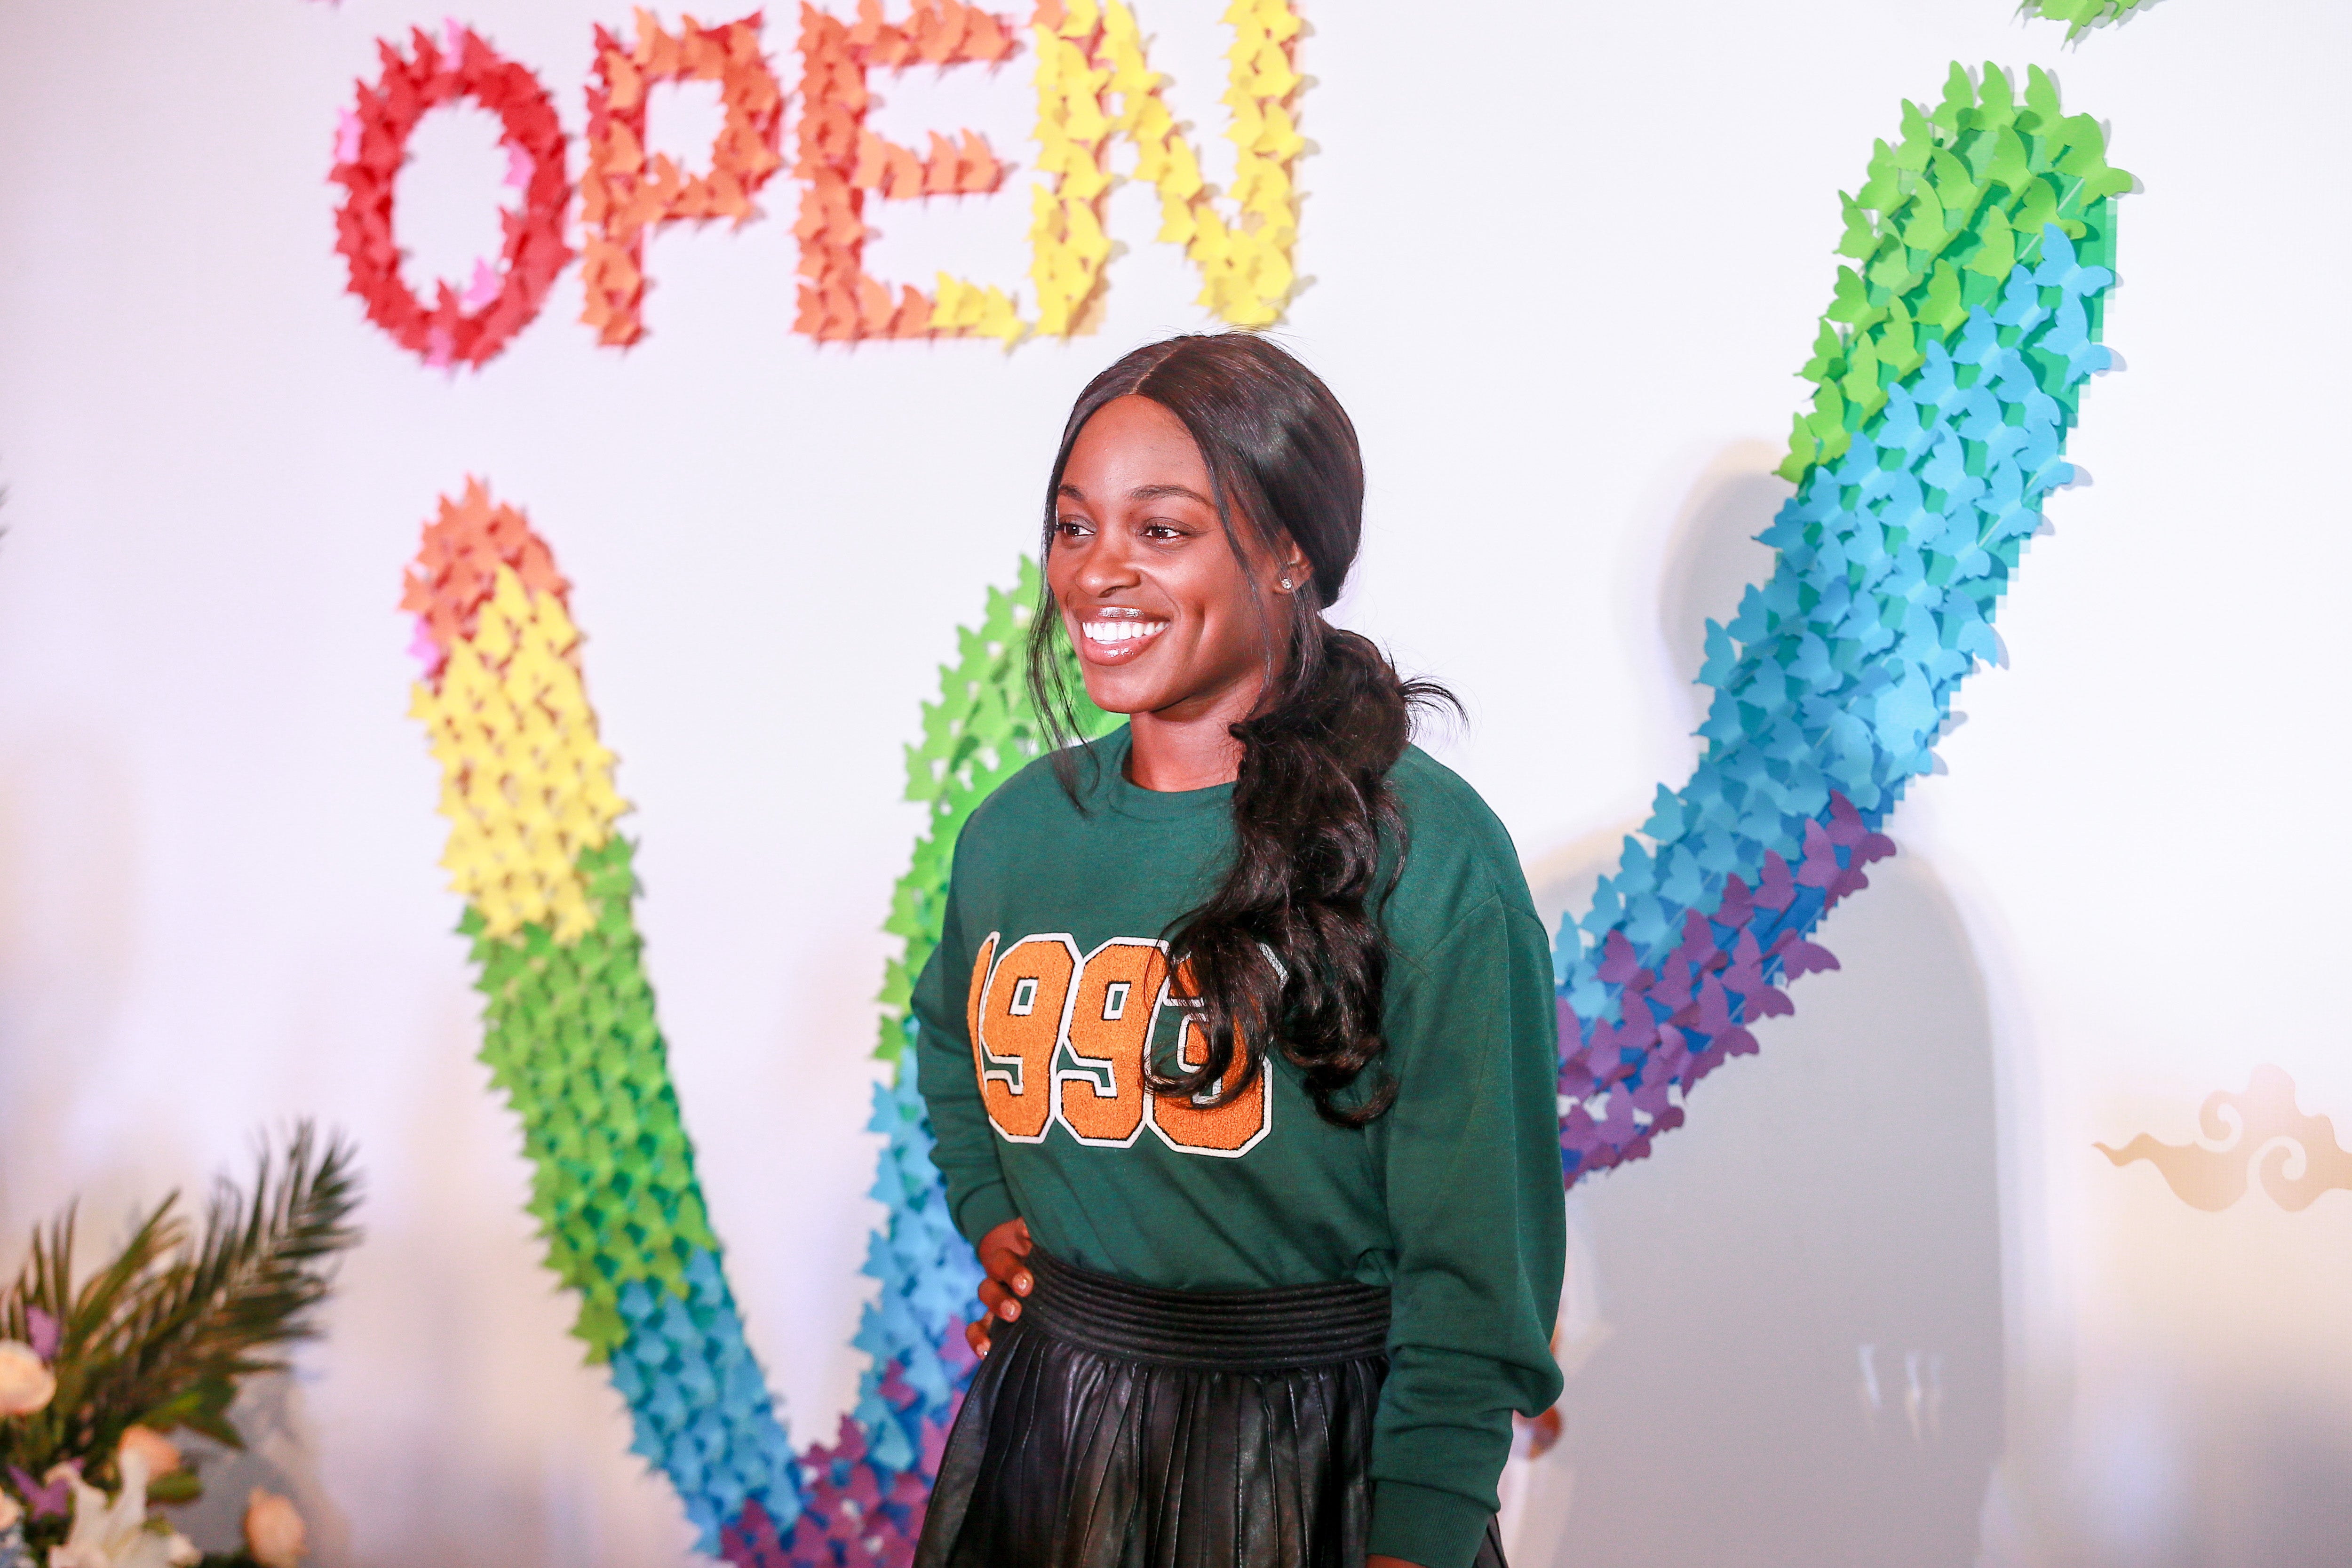 Sloane Stephens Says It's 'Powerful' Venus And Serena Williams Are Helping To Gain Equal Pay In Tennis